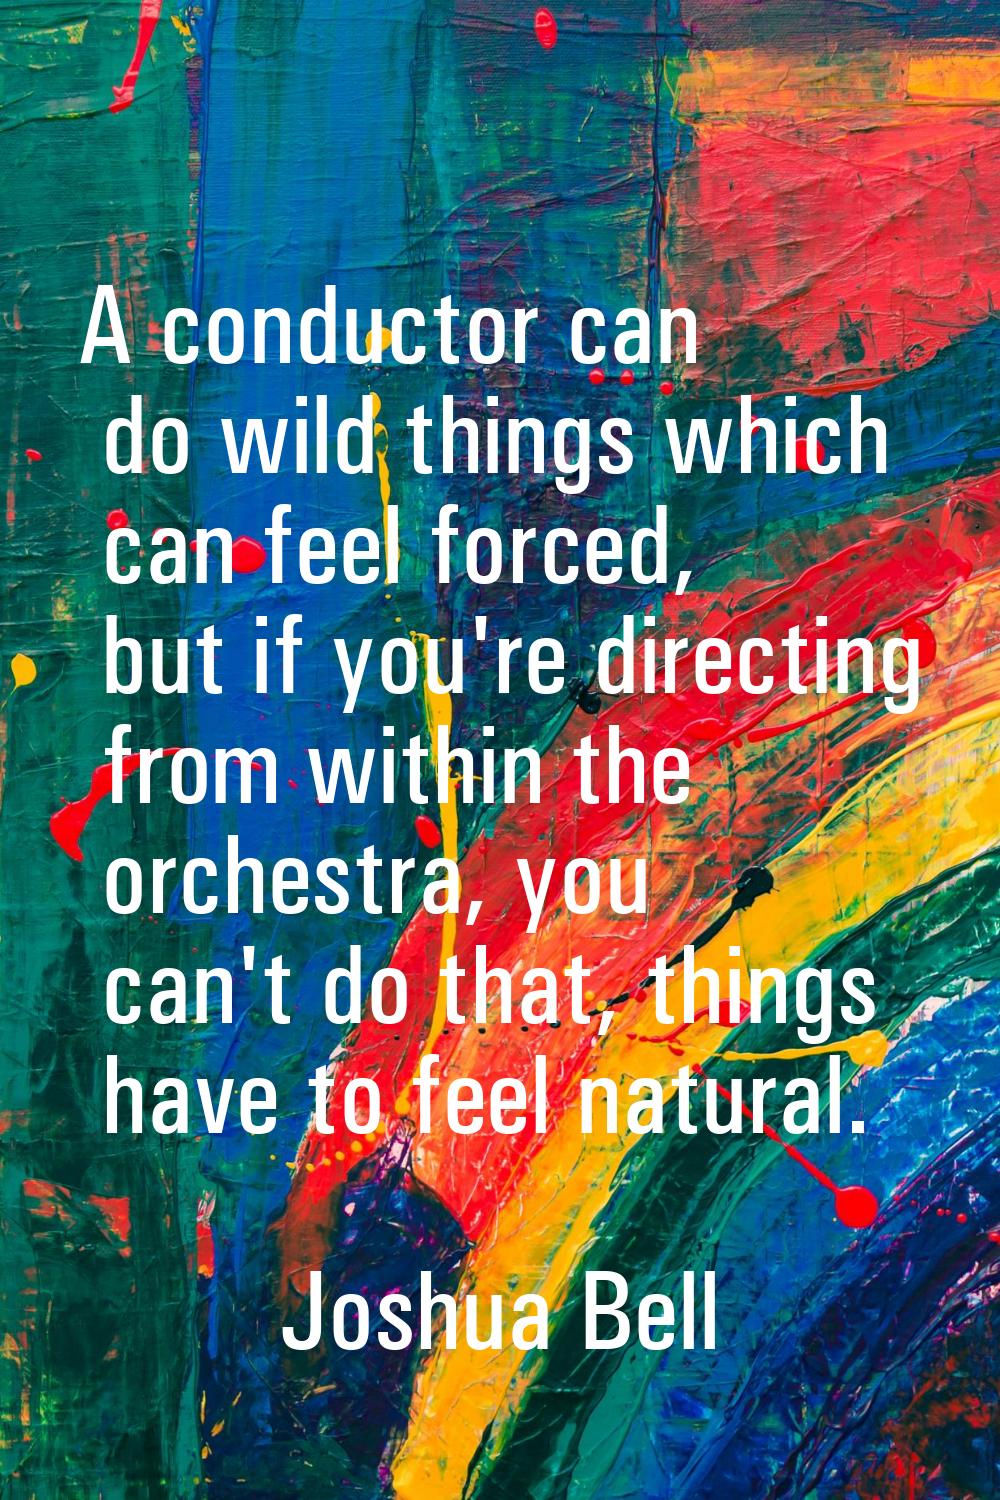 A conductor can do wild things which can feel forced, but if you're directing from within the orche